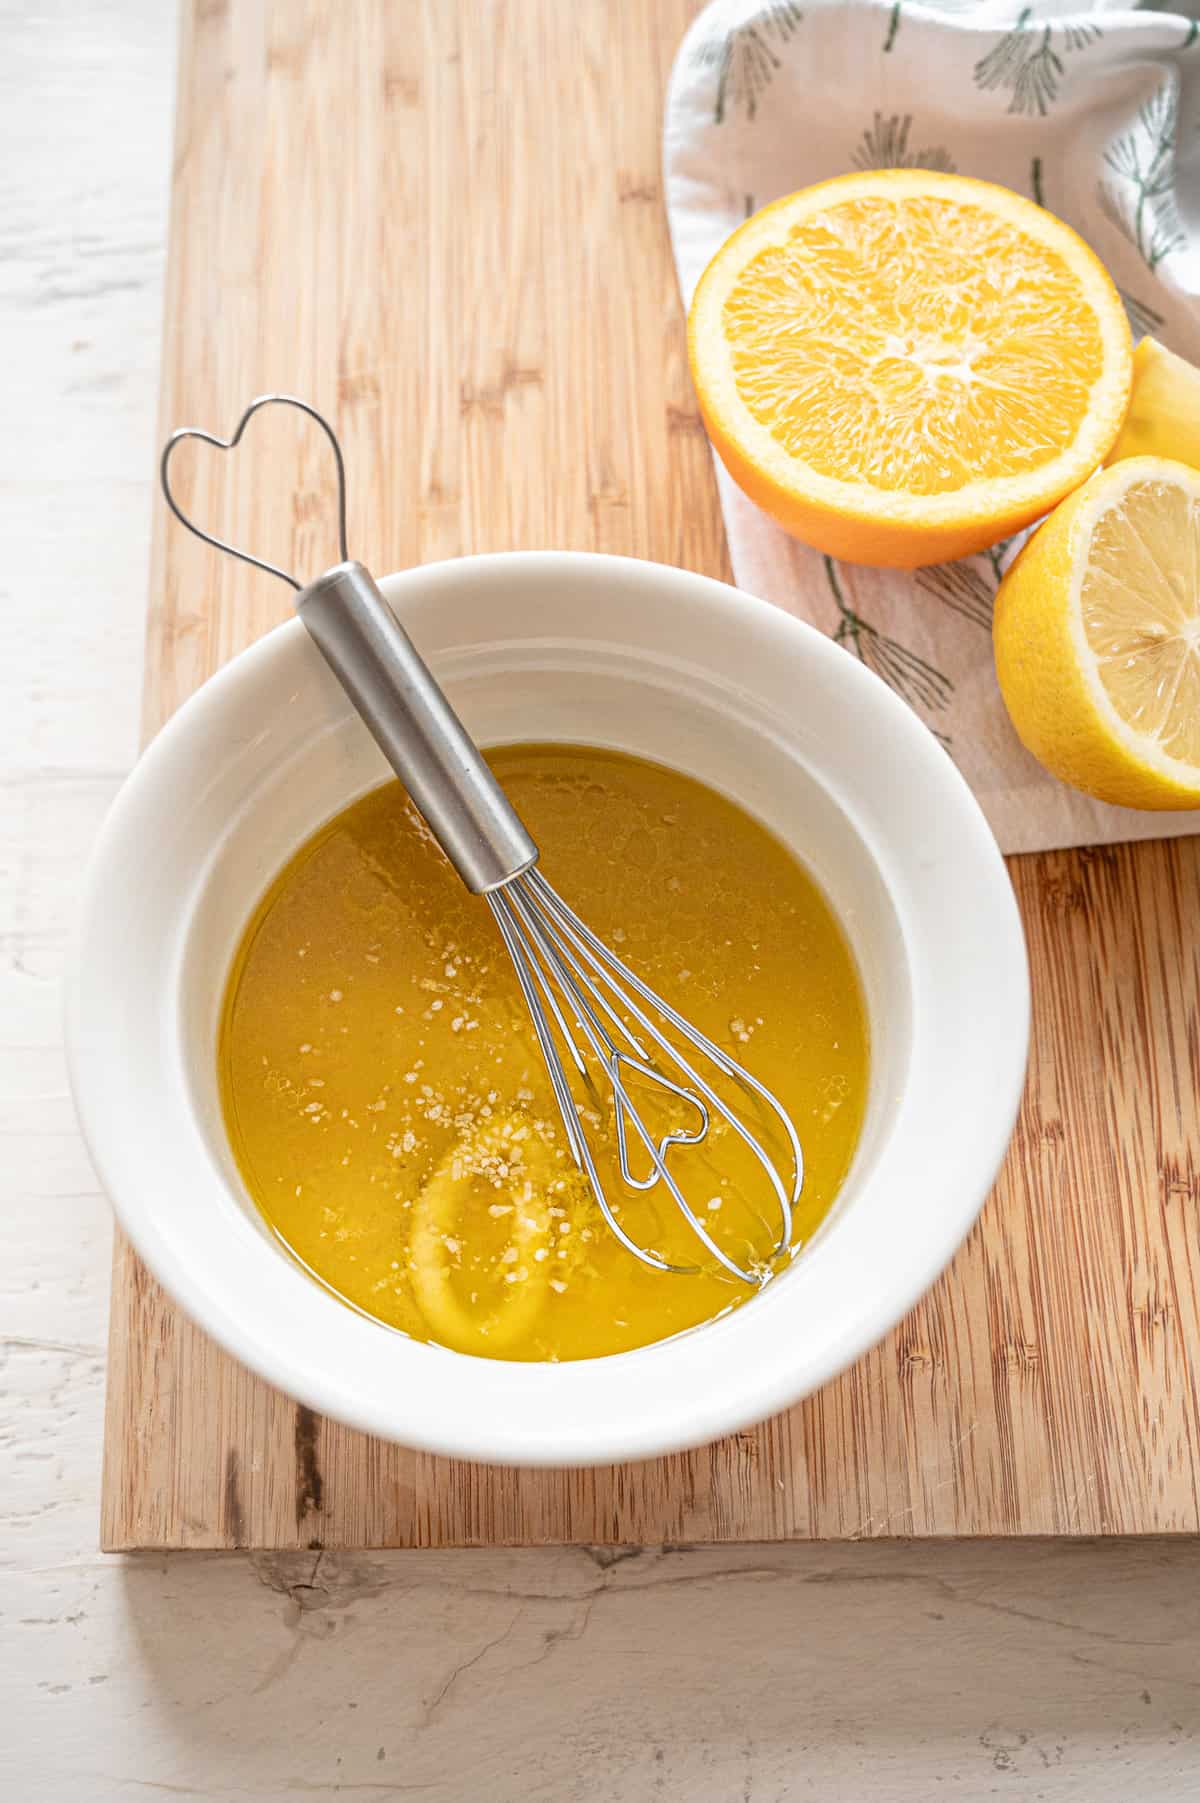 Creamy citrus dressing ingredients being whisked together with a small wire whisk in a white bowl.